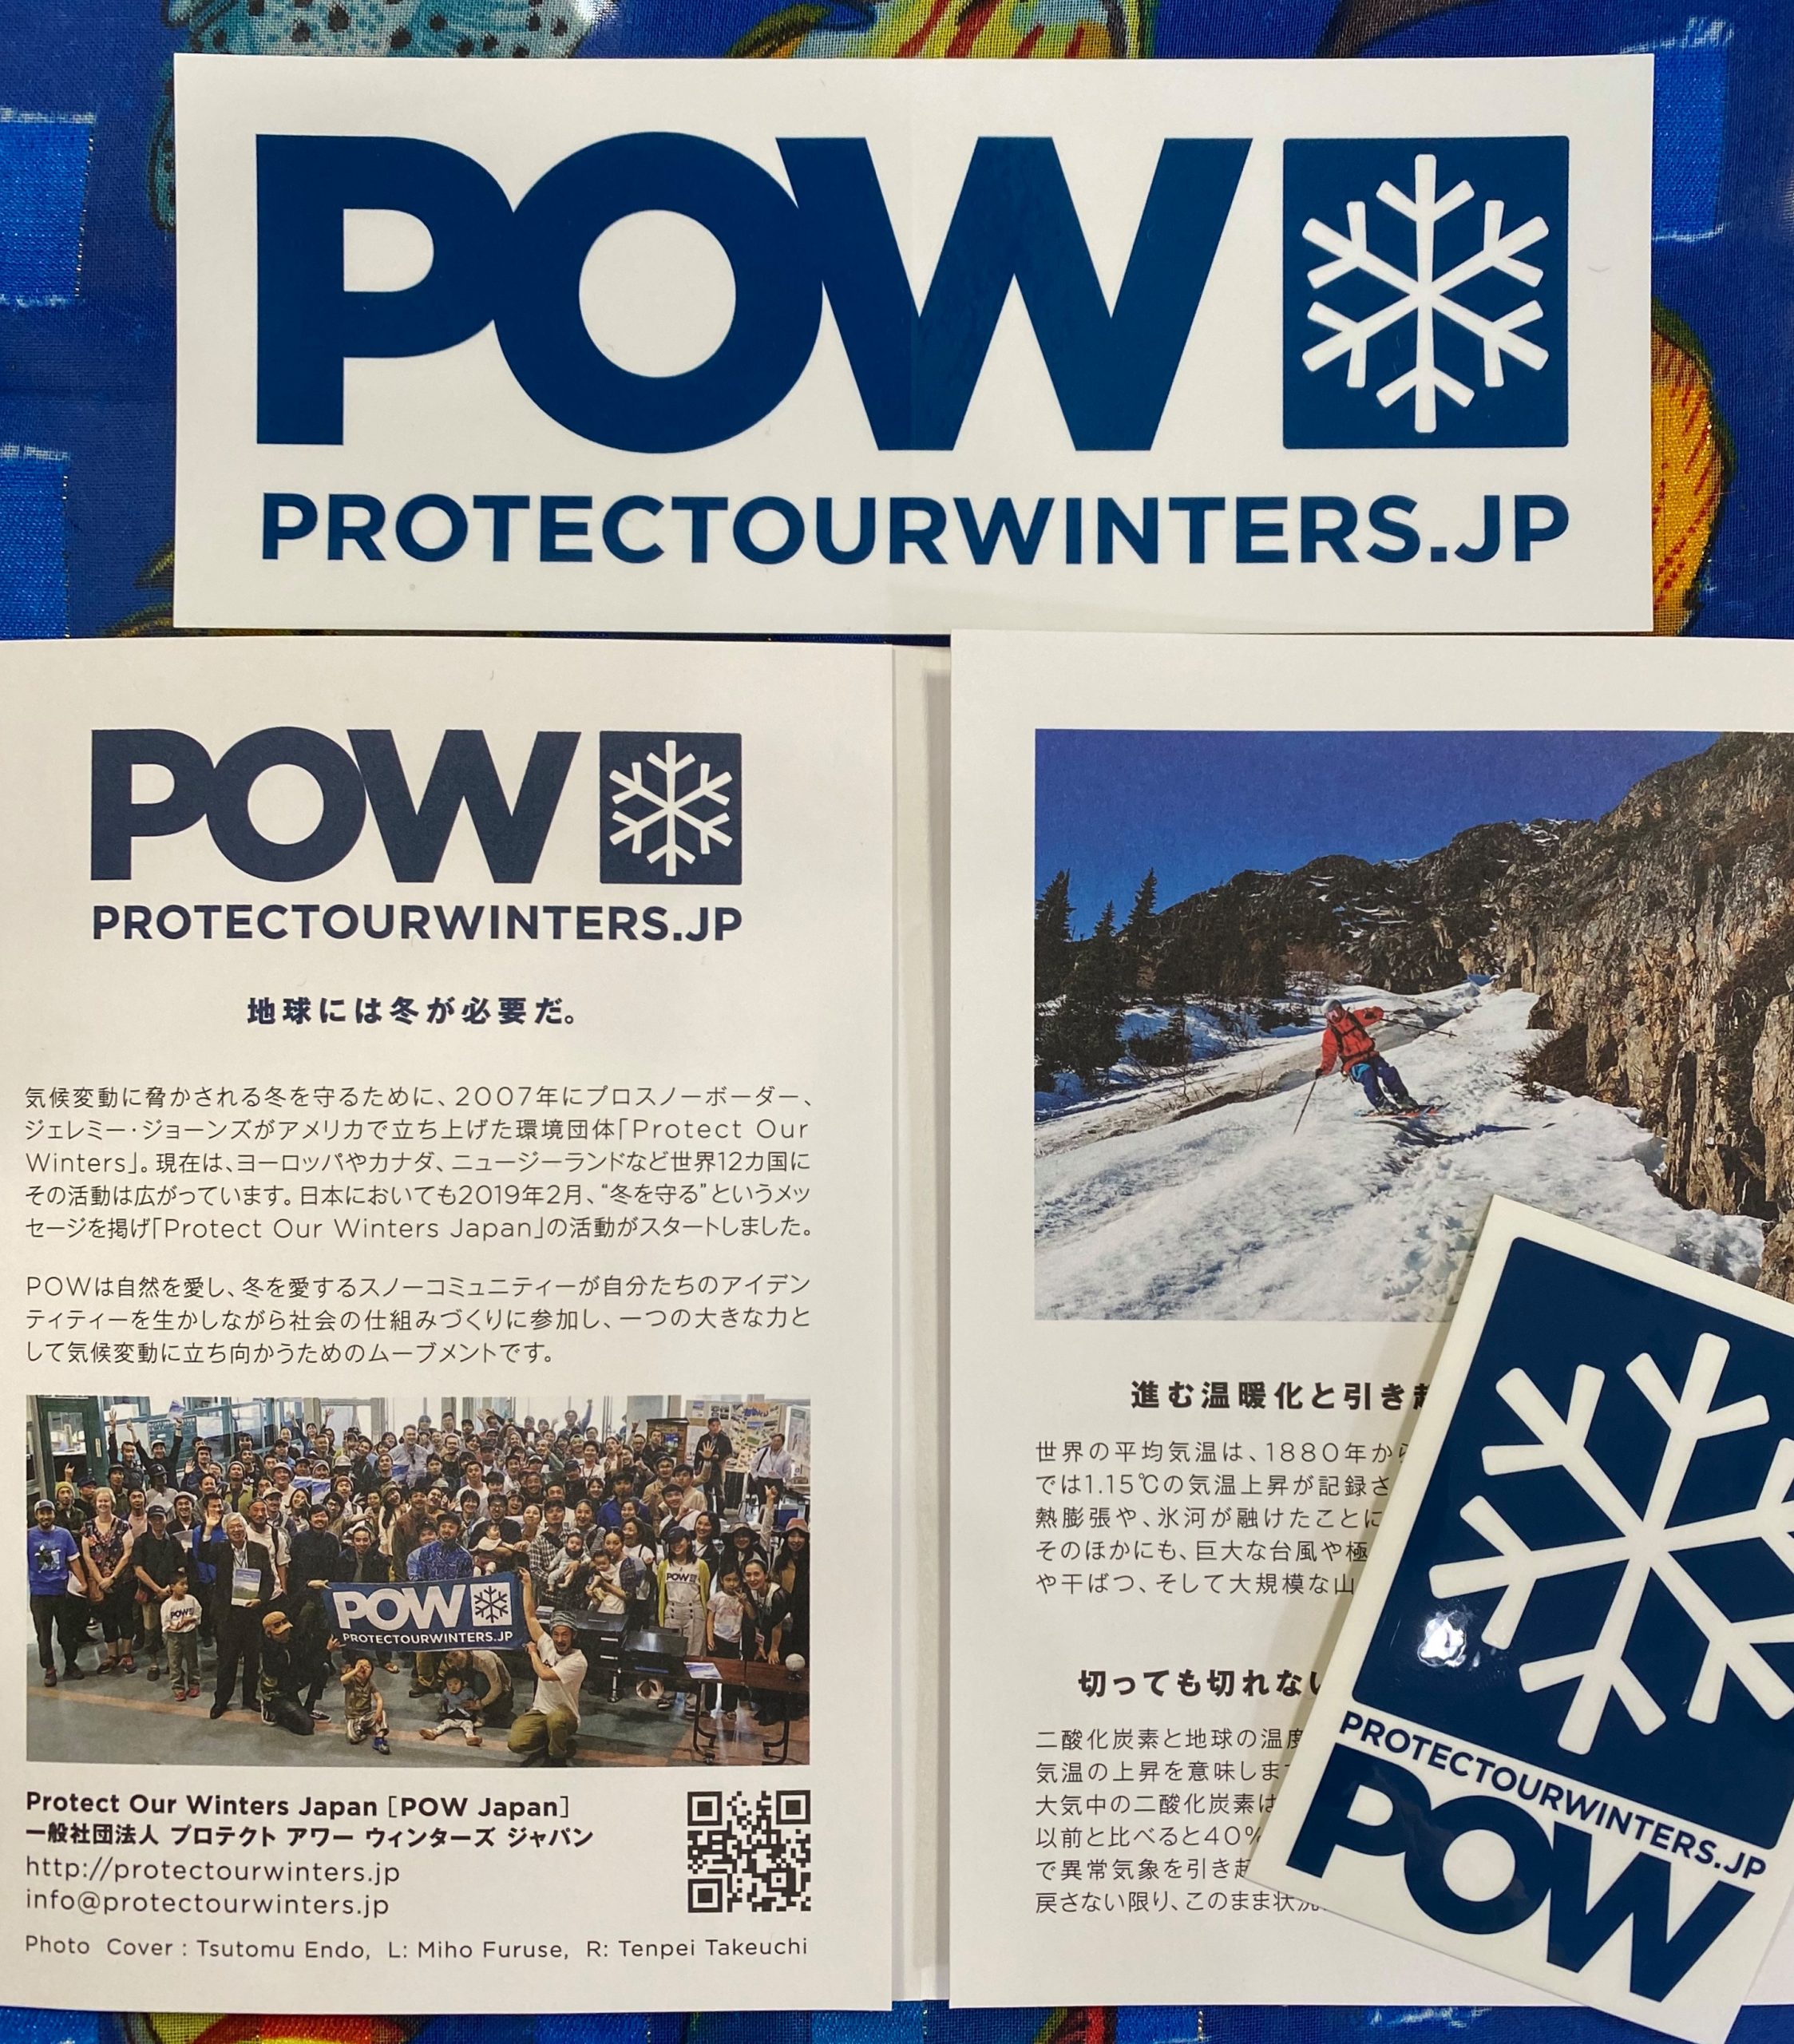 POW(Protect Our Winter) – Diverひろの見る前に跳べ！